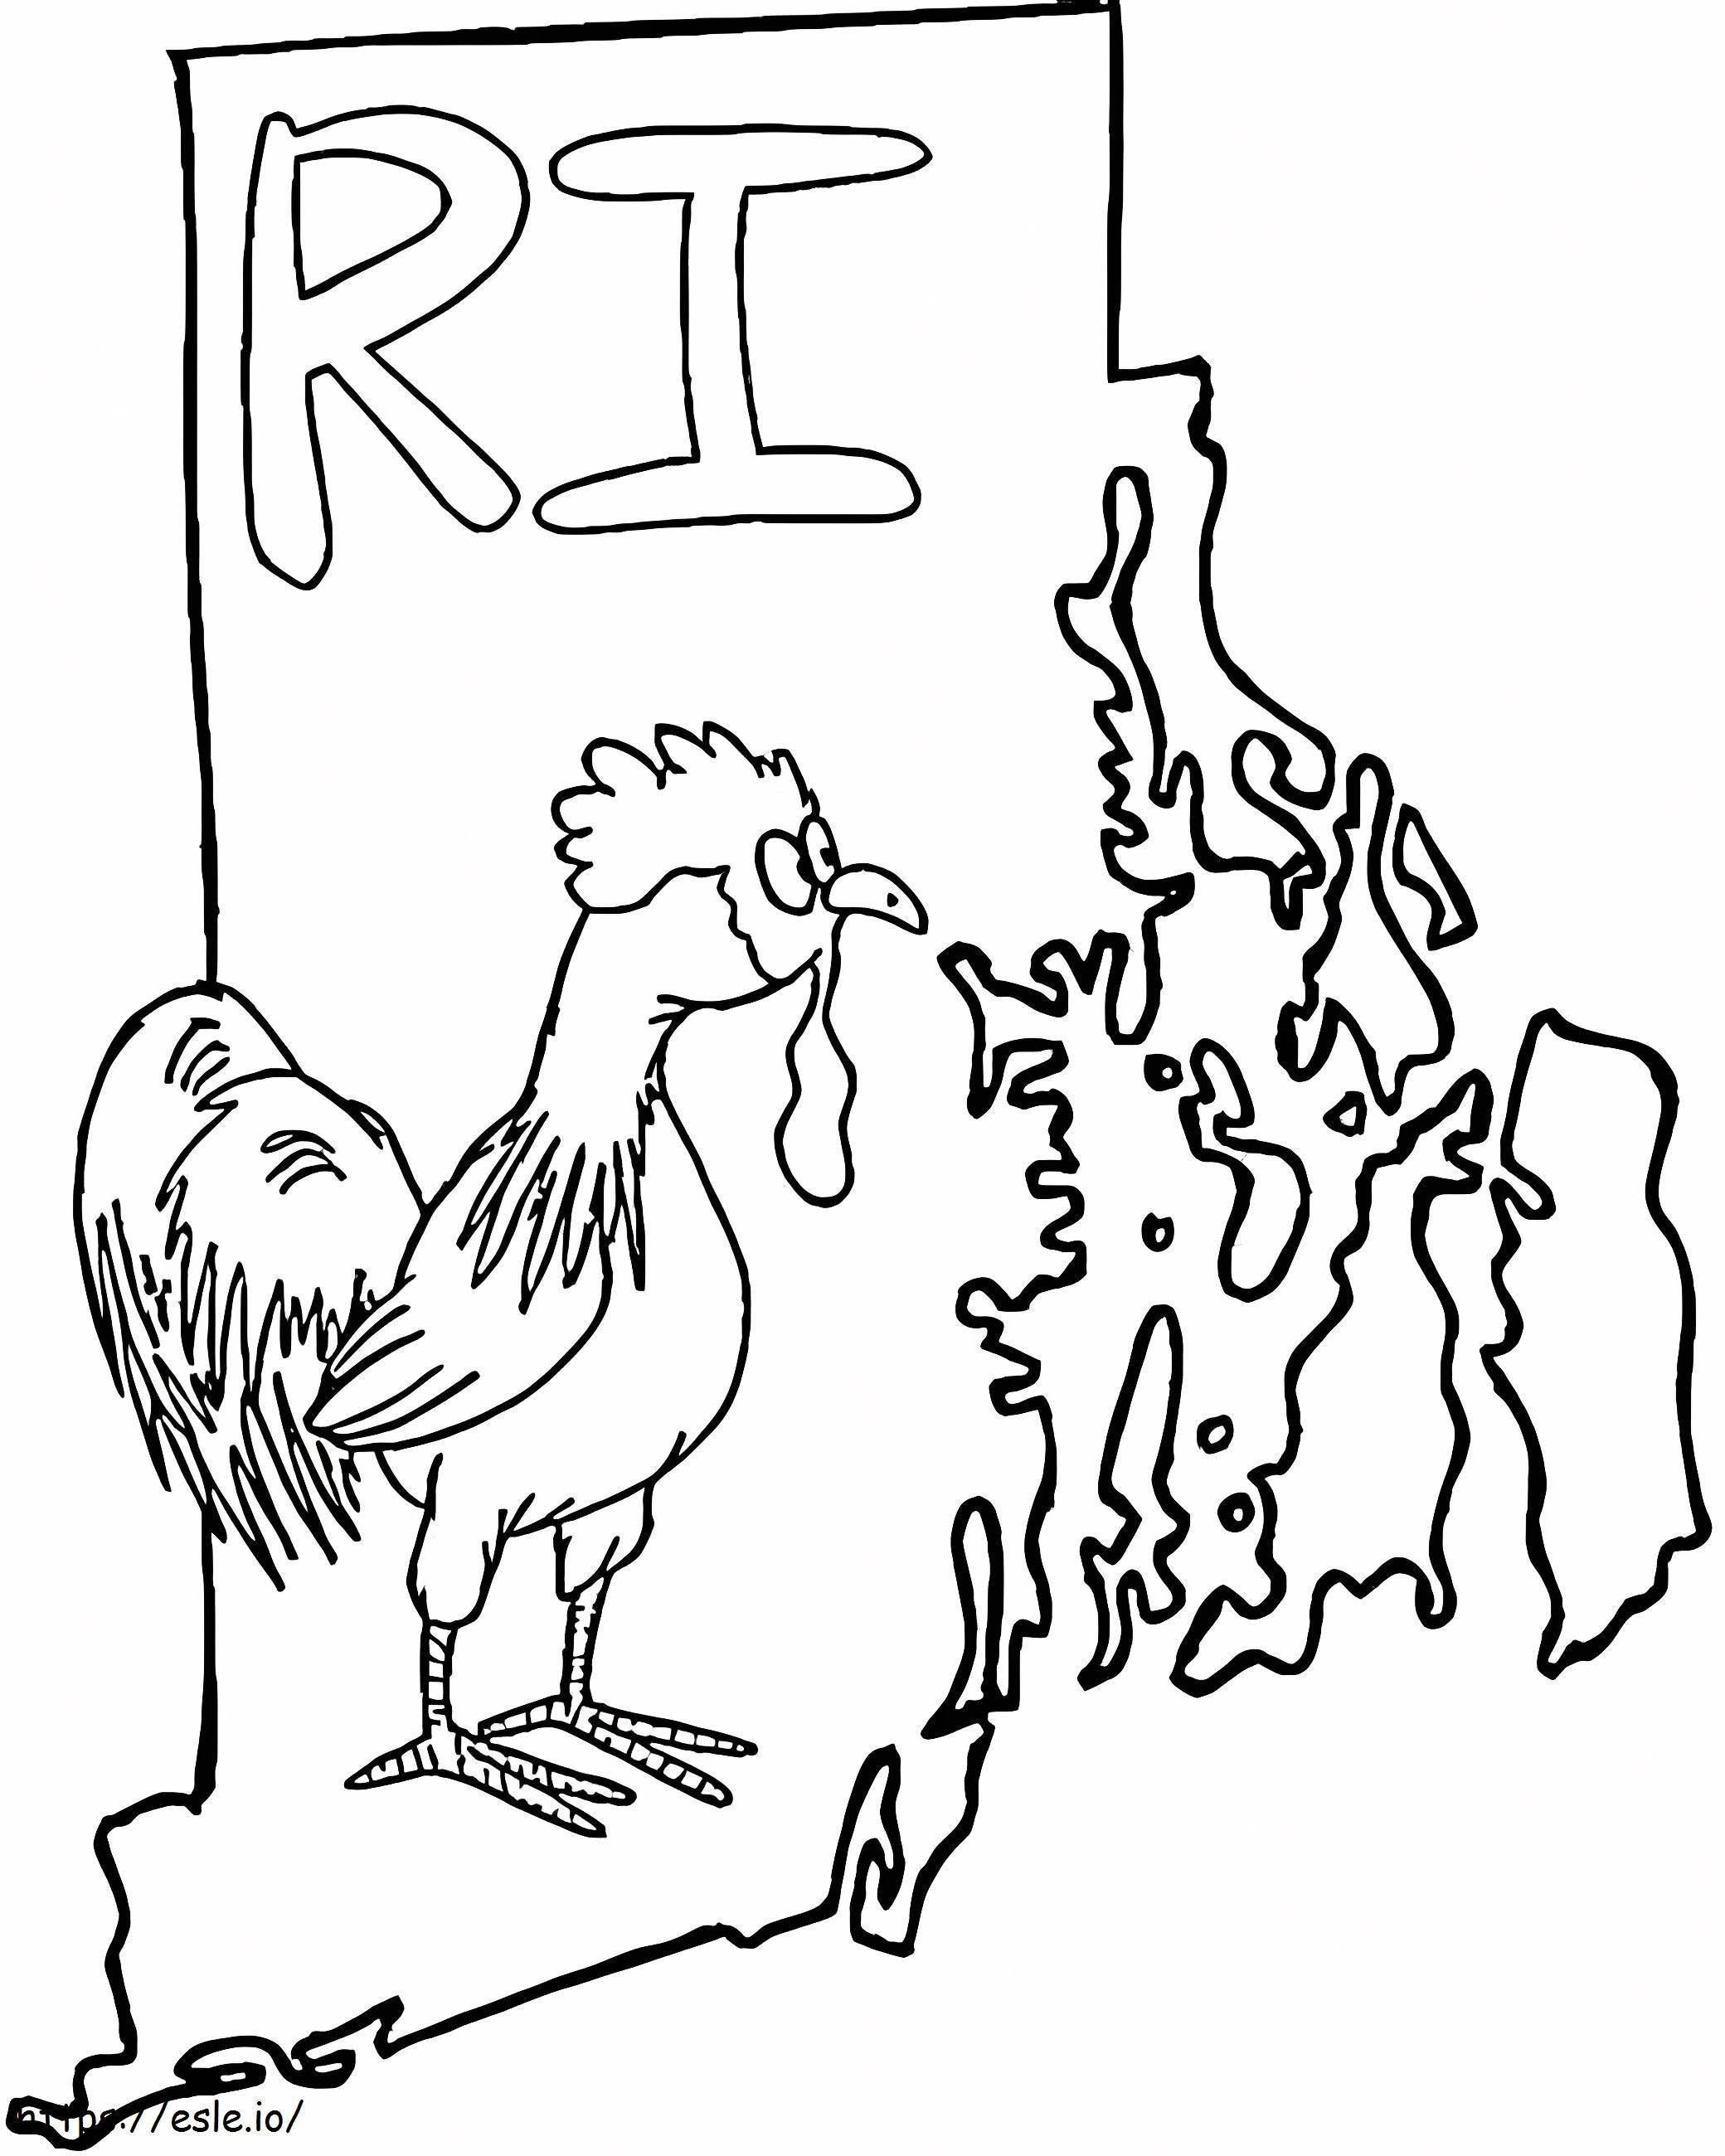 Free Printable Rhode Island coloring page